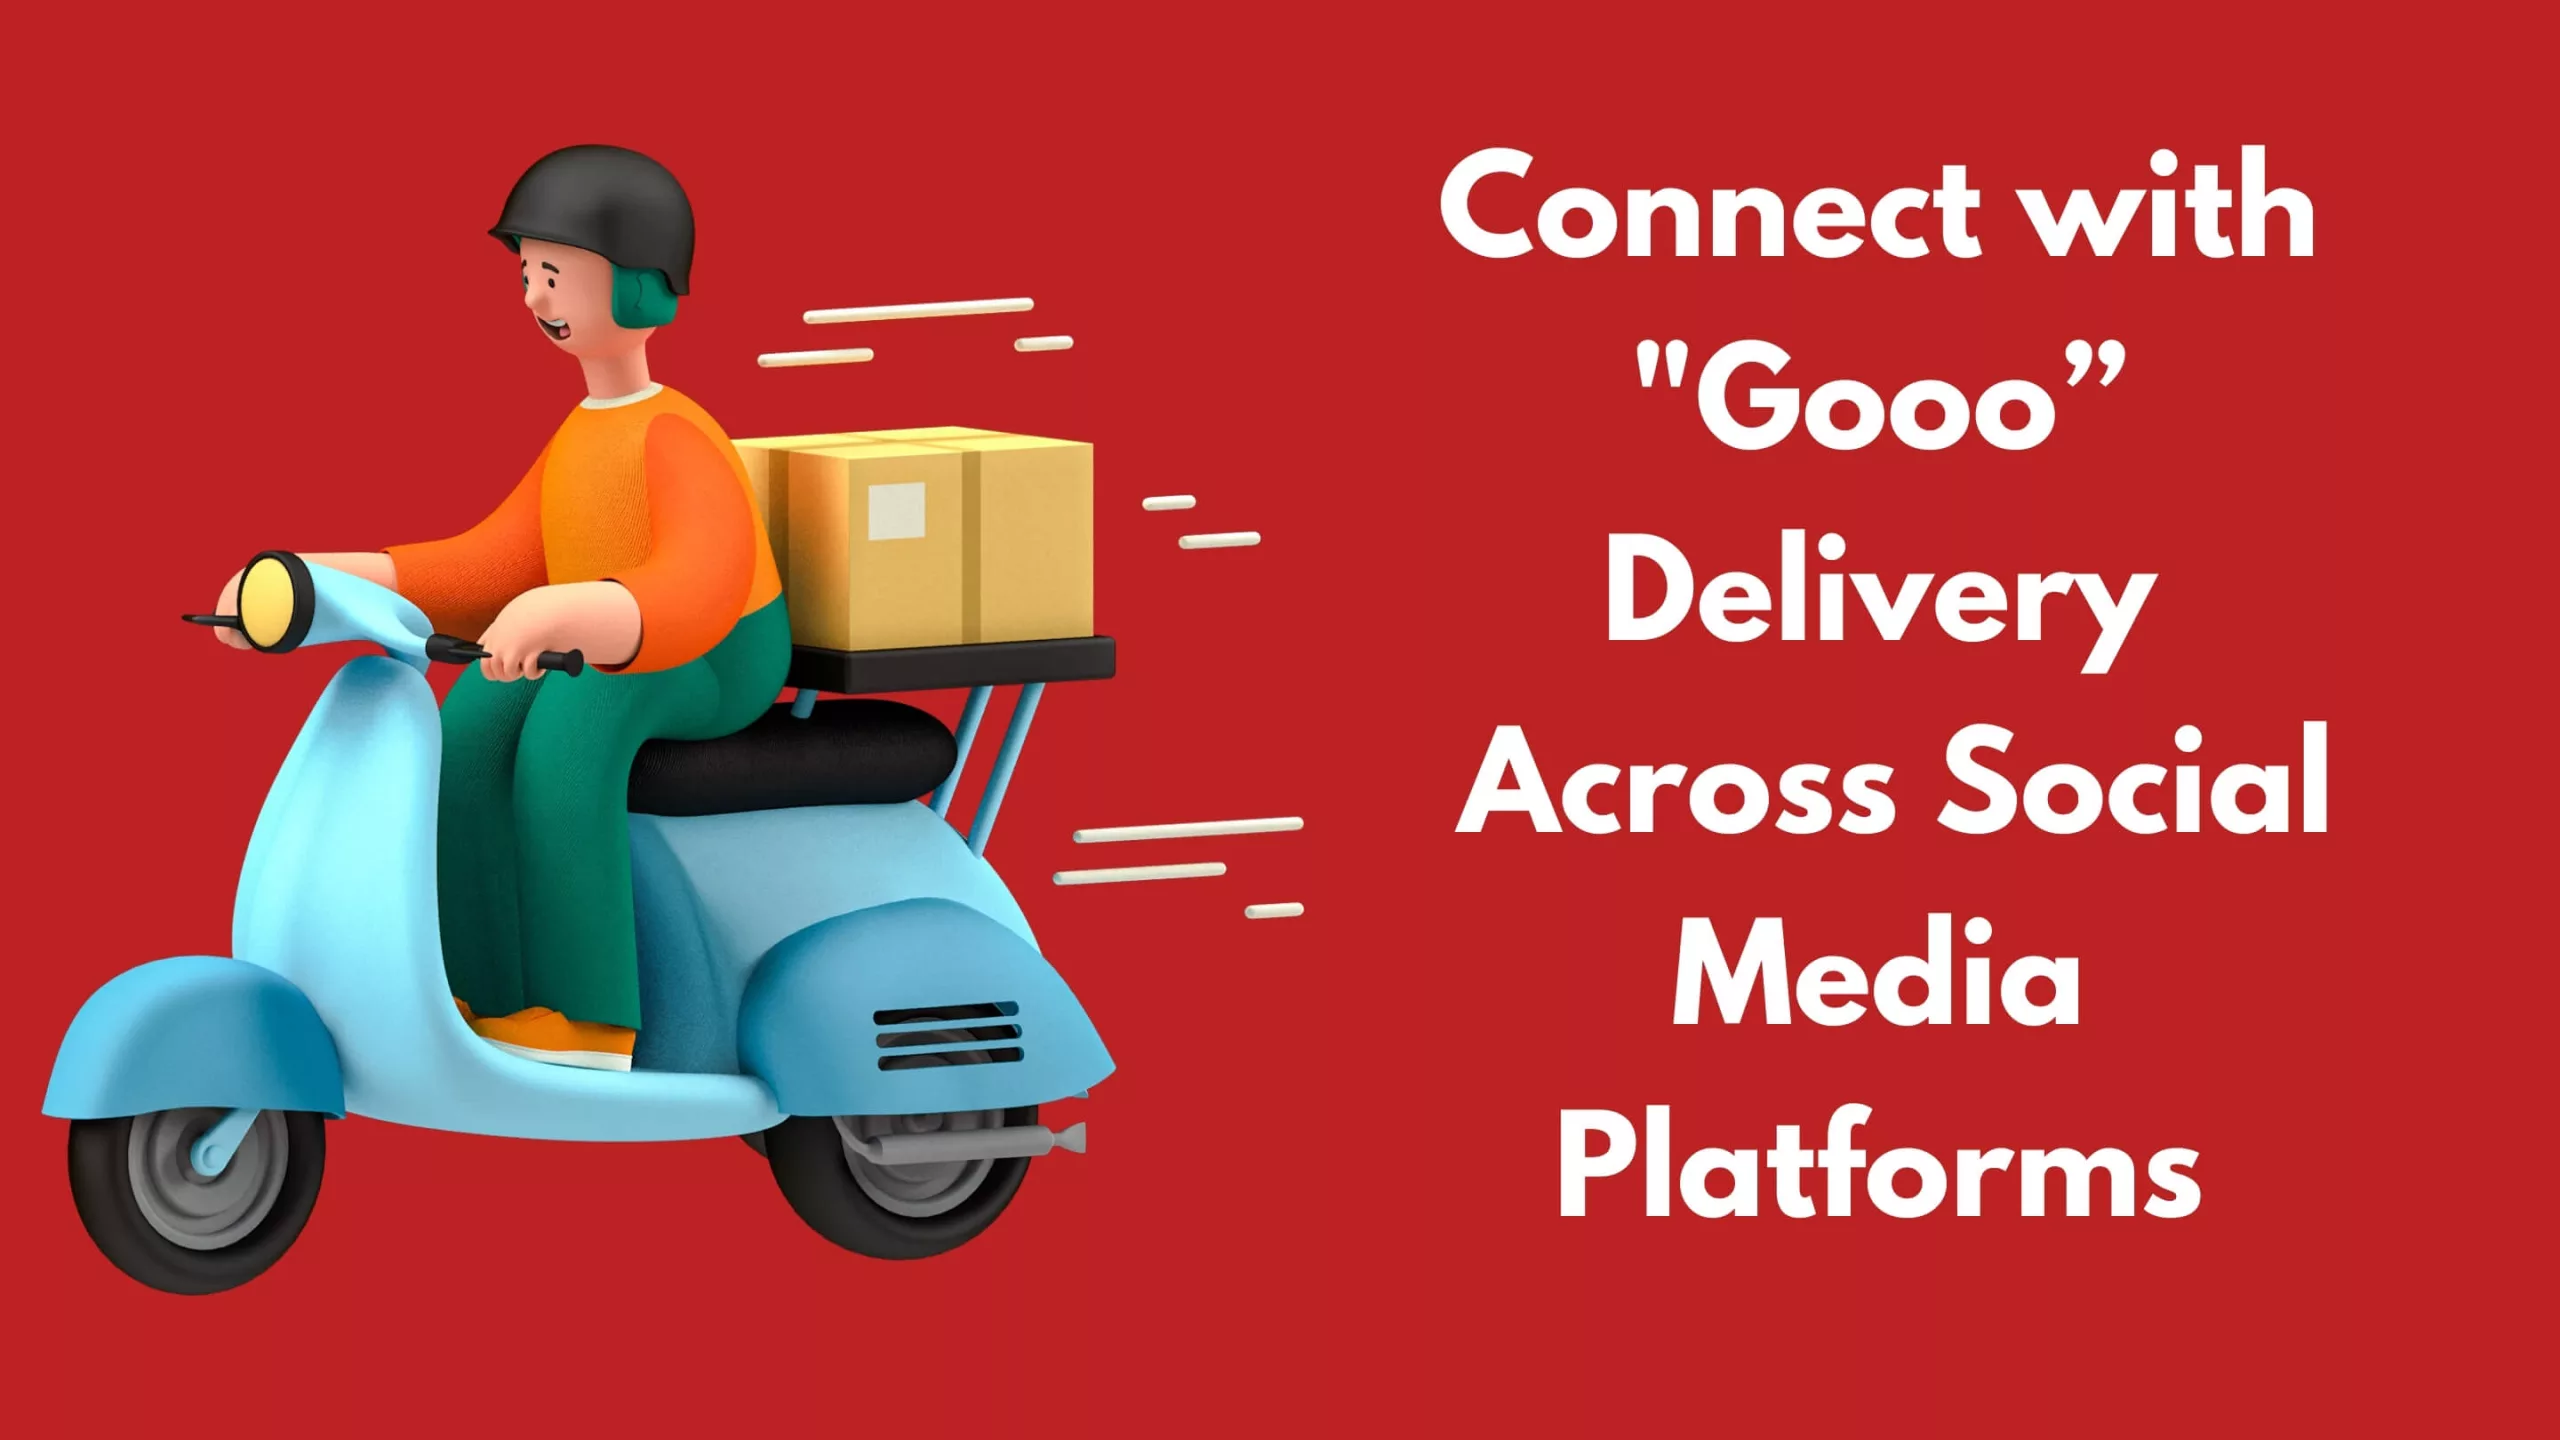 Connect with "Gooo" Delivery Across Social Media Platforms